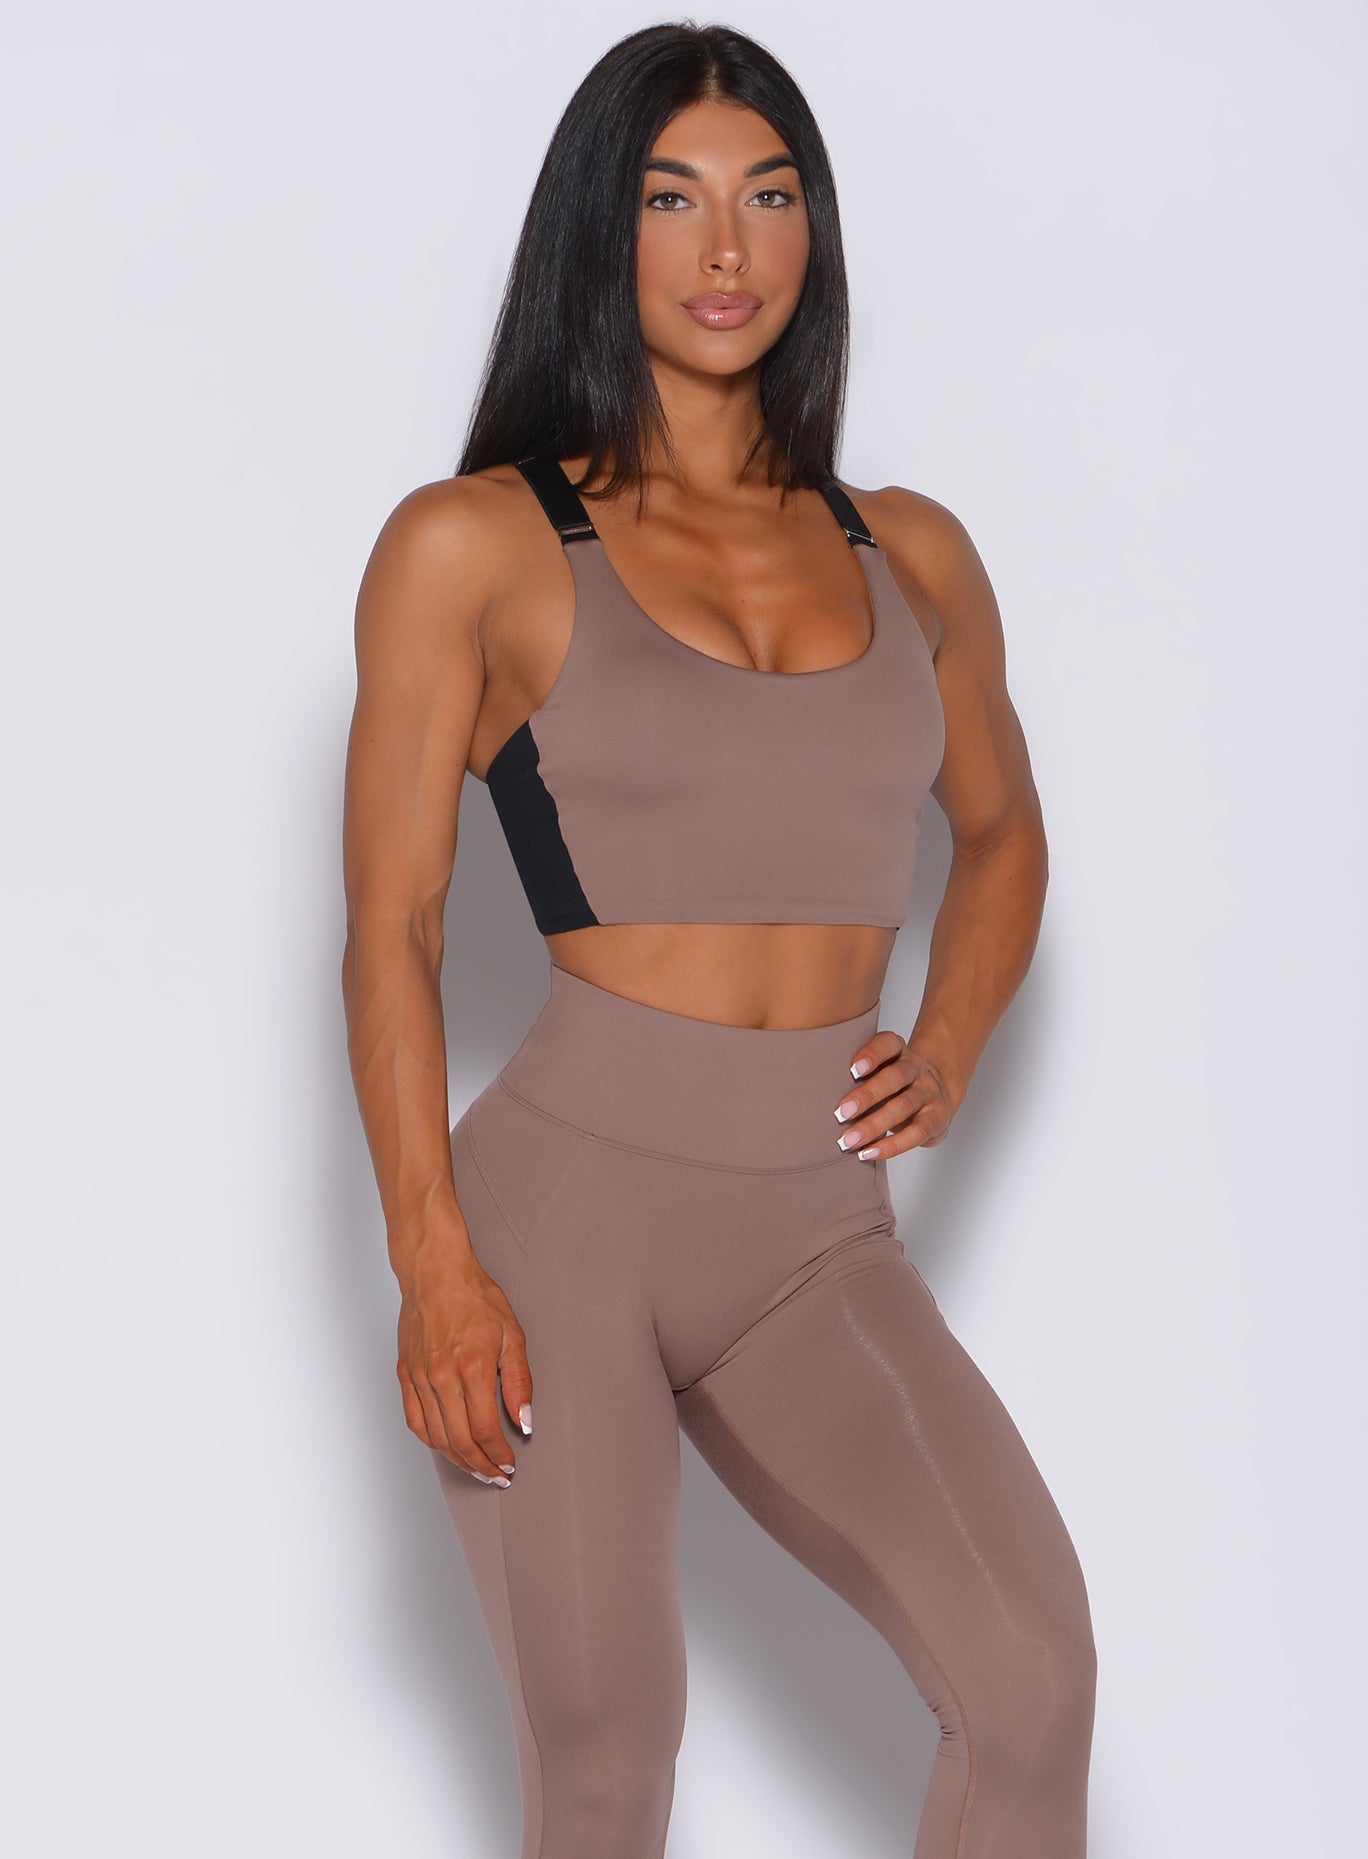 Model facing forward wearing our banded sports bra in cocoa color and a matching leggings